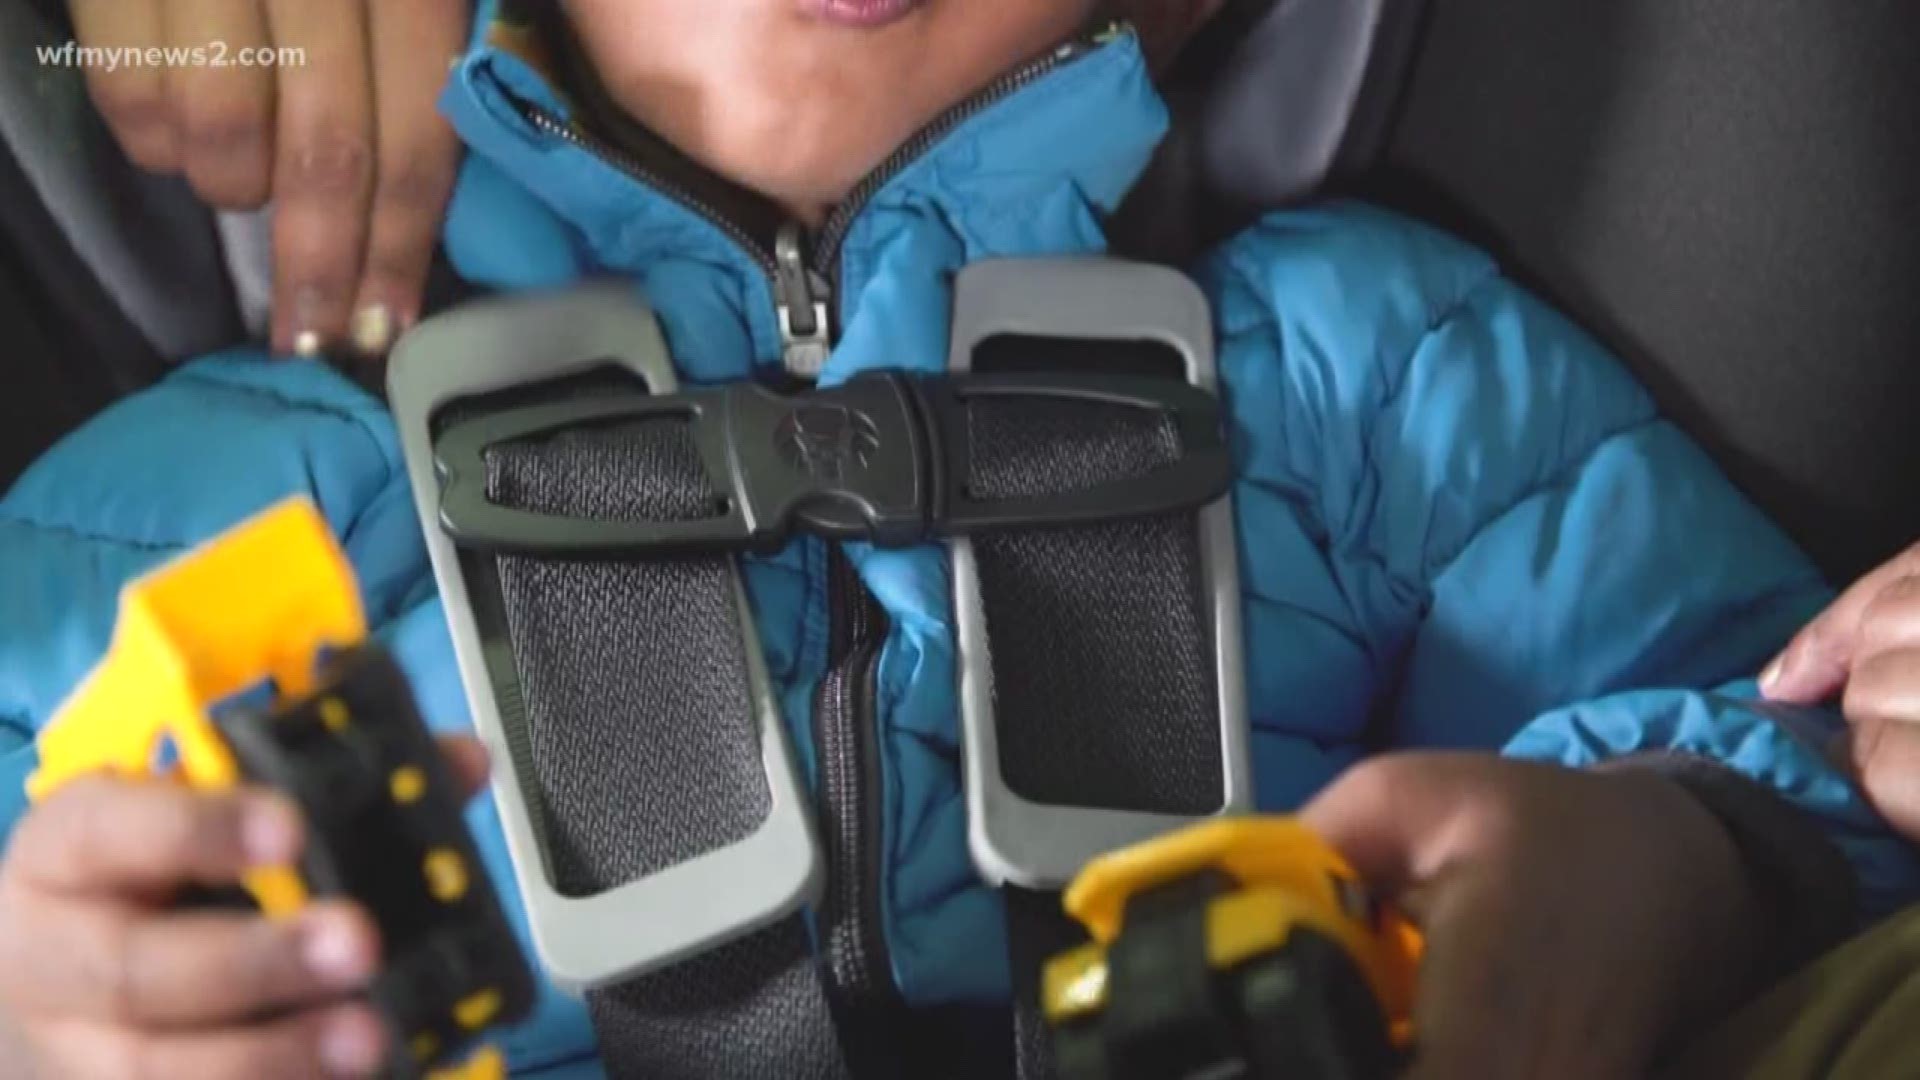 Depending on your child’s age, they may need a wardrobe change in the car to stay safe